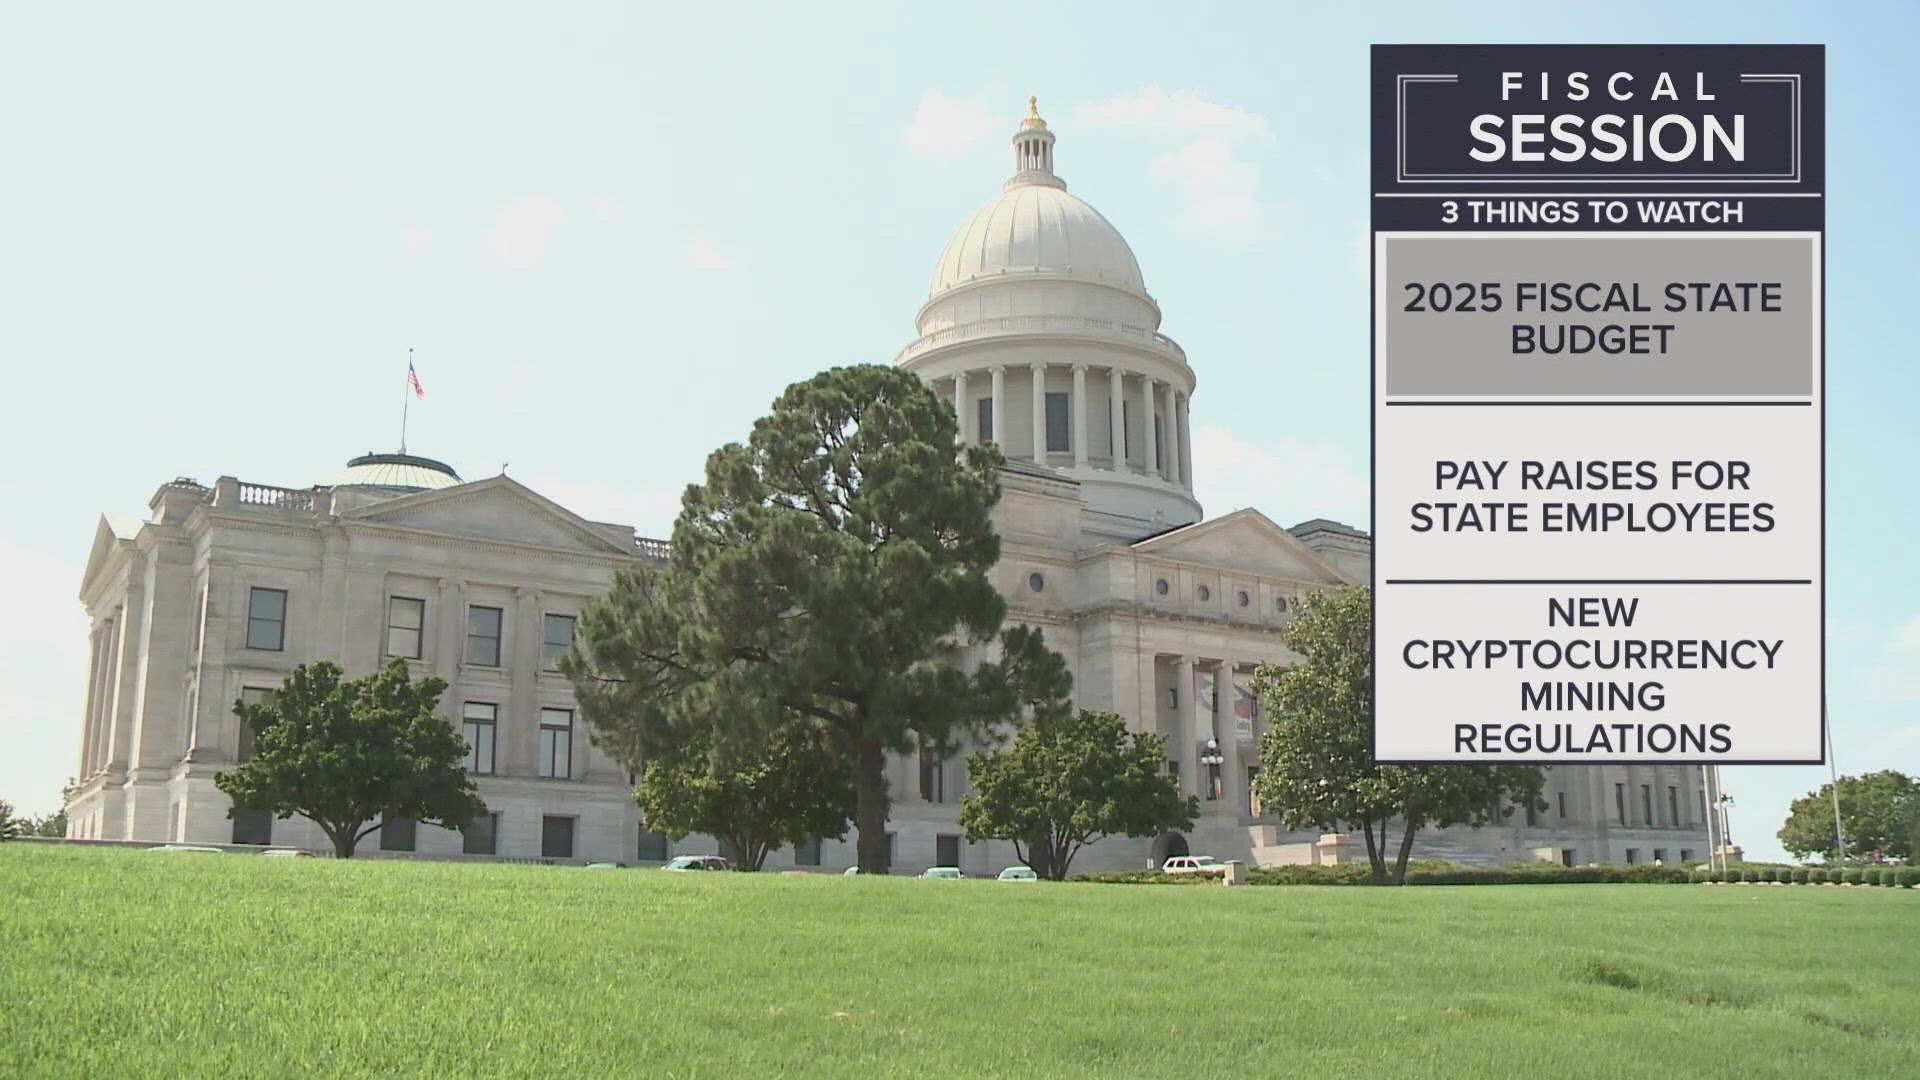 This could be the final week of Arkansas's fiscal session at the state capitol as lawmakers wrap up.